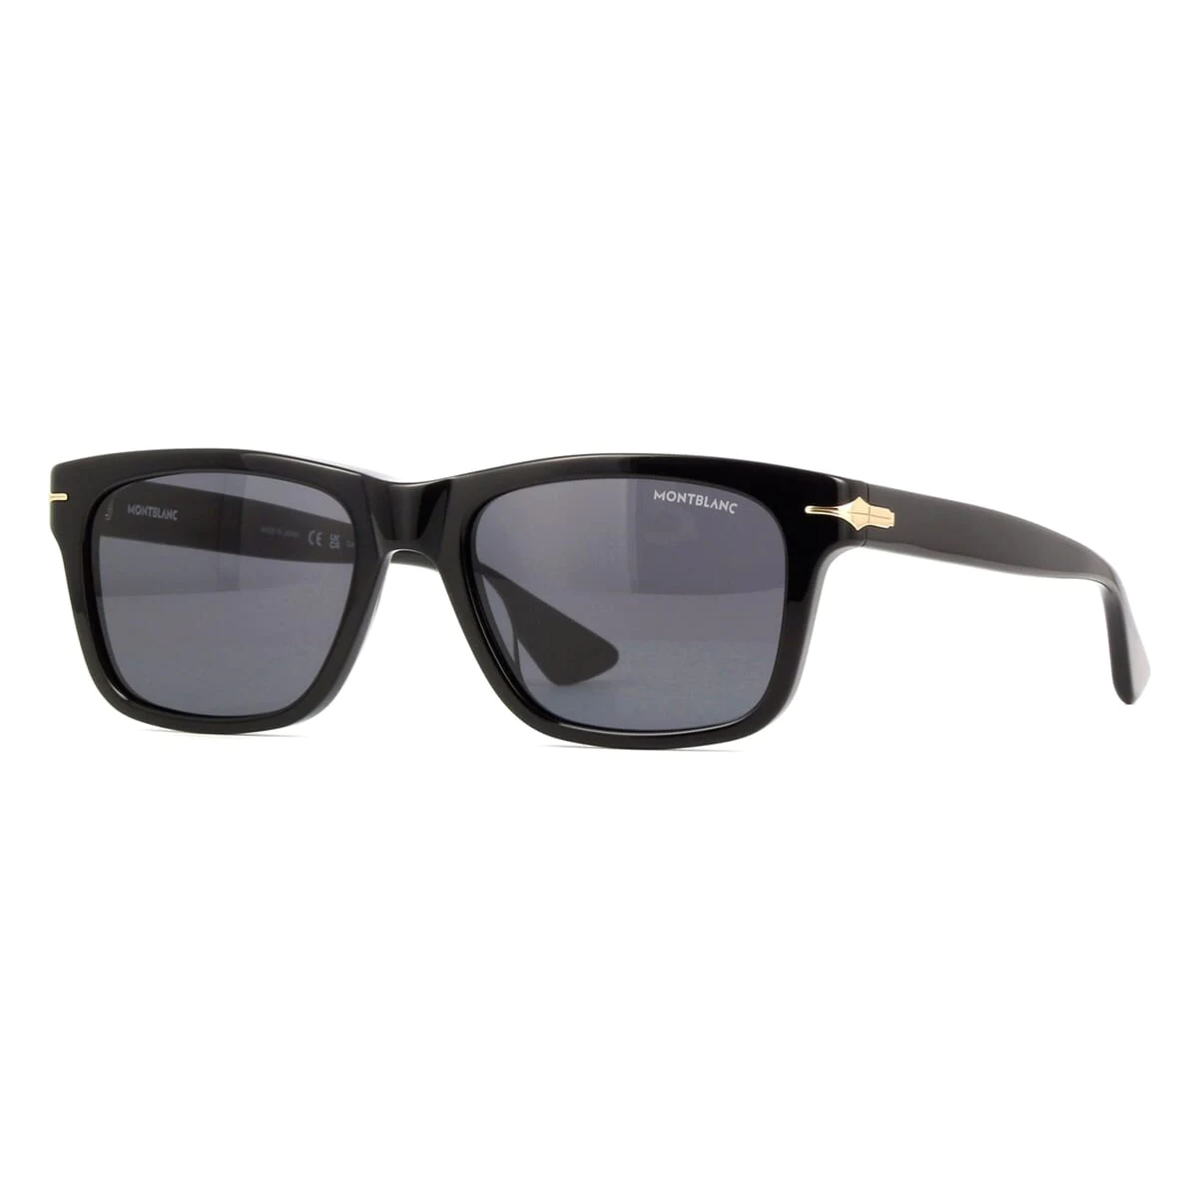 "Mont Blanc 0263 Square Sunglasses: Top branded stylish shades for men. Choose from different colors and lens options."